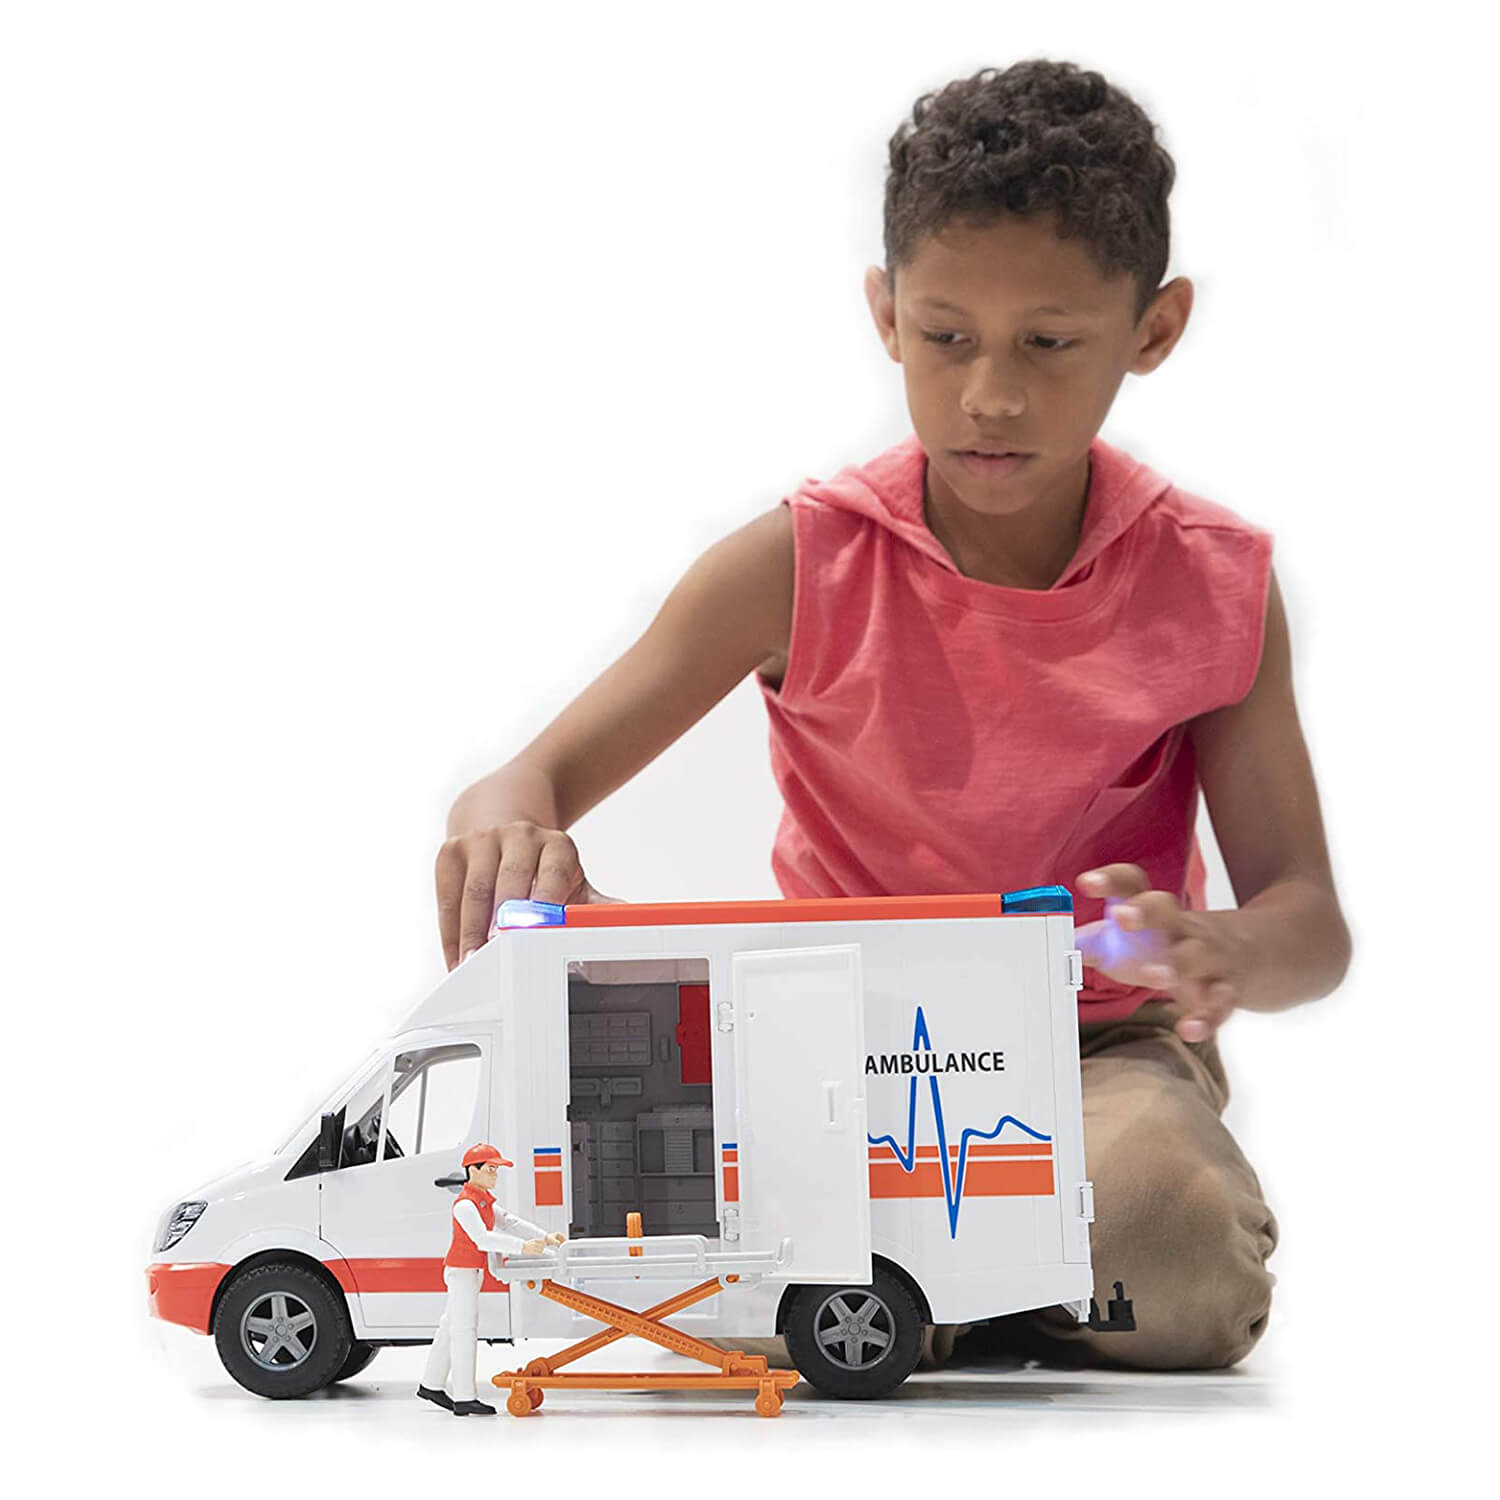 Kid playing with the ambulance toy.